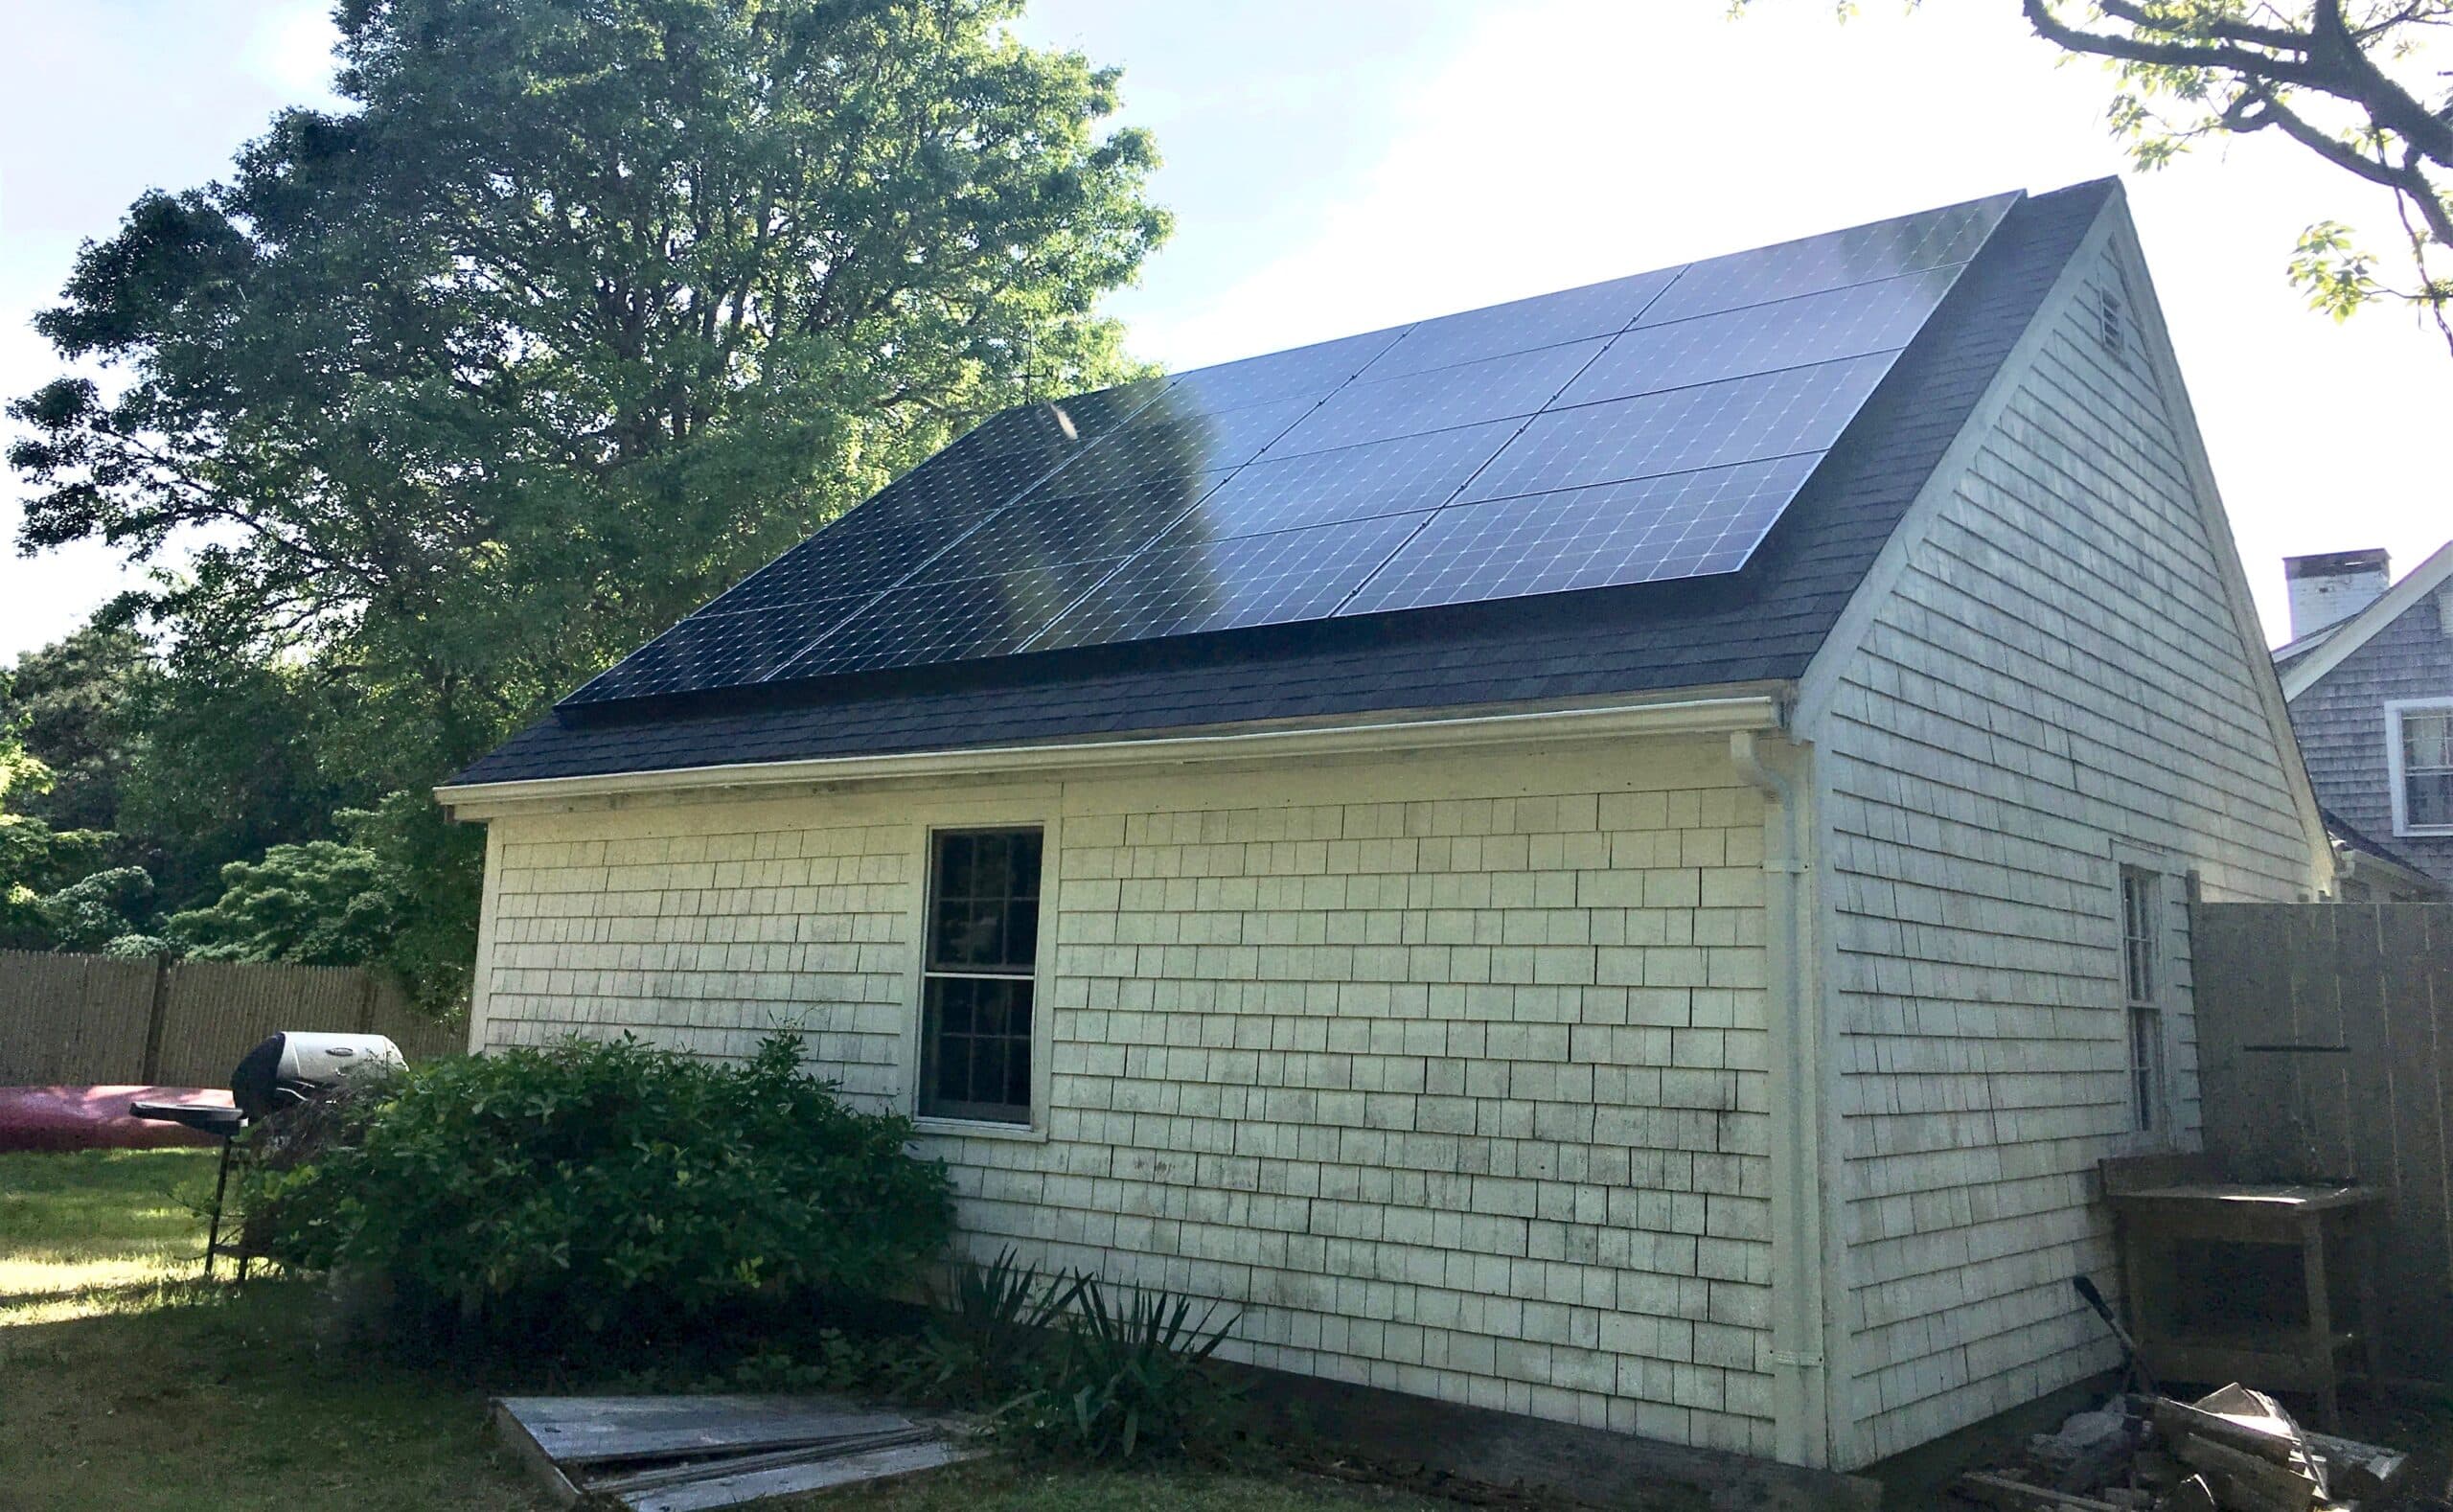 Solar array on a home in Harwich, MA. Cape Cod solar company My Generation Energy installed this system.